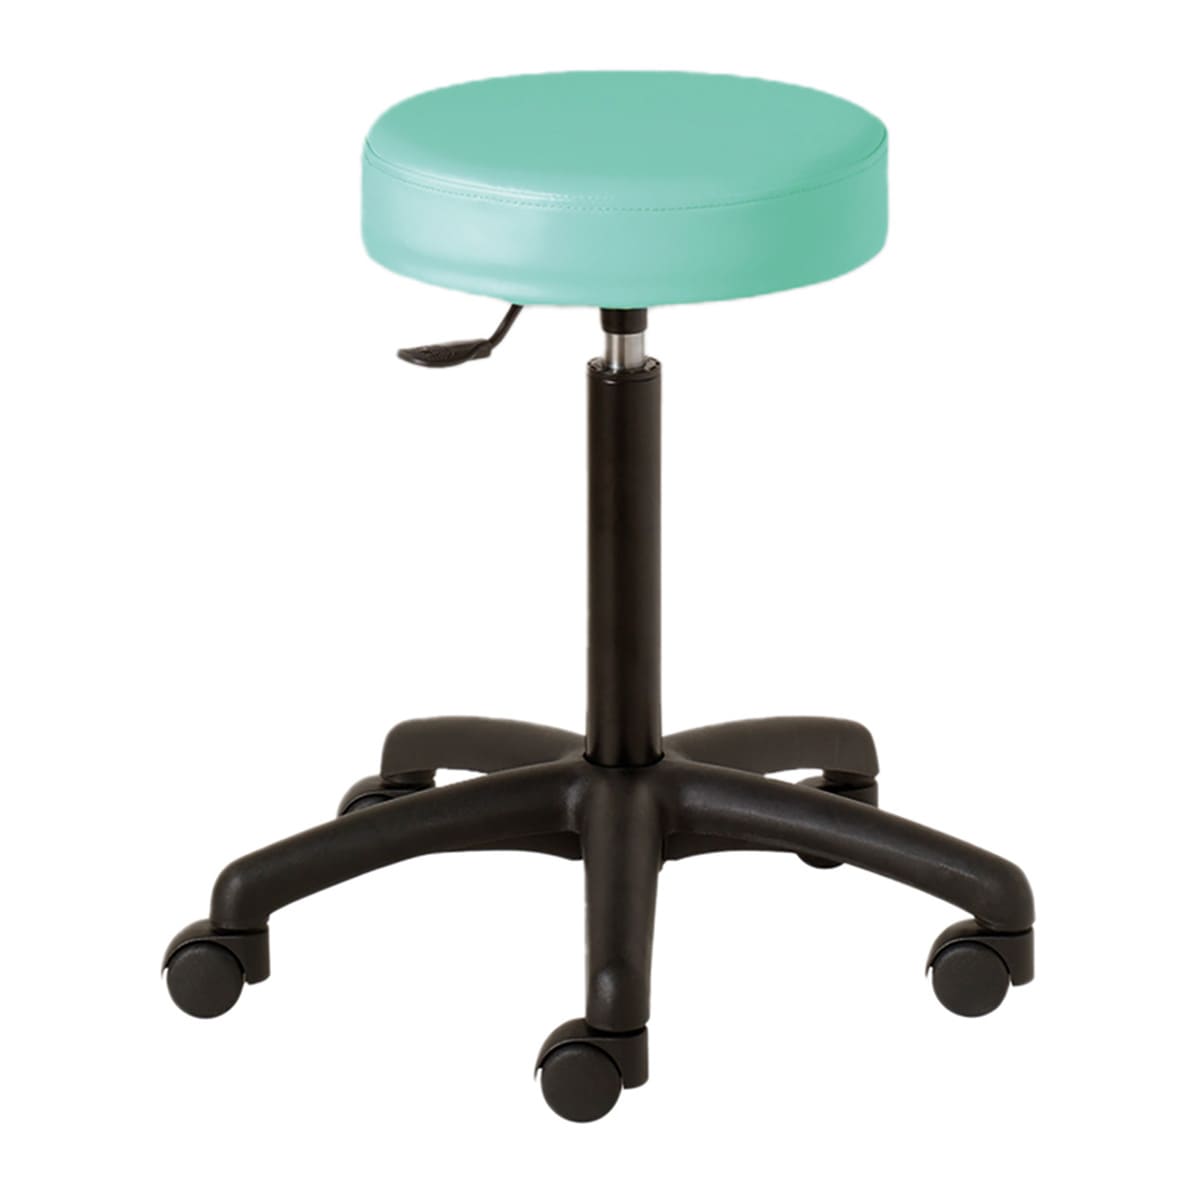 Stool with round seat, black ABS base